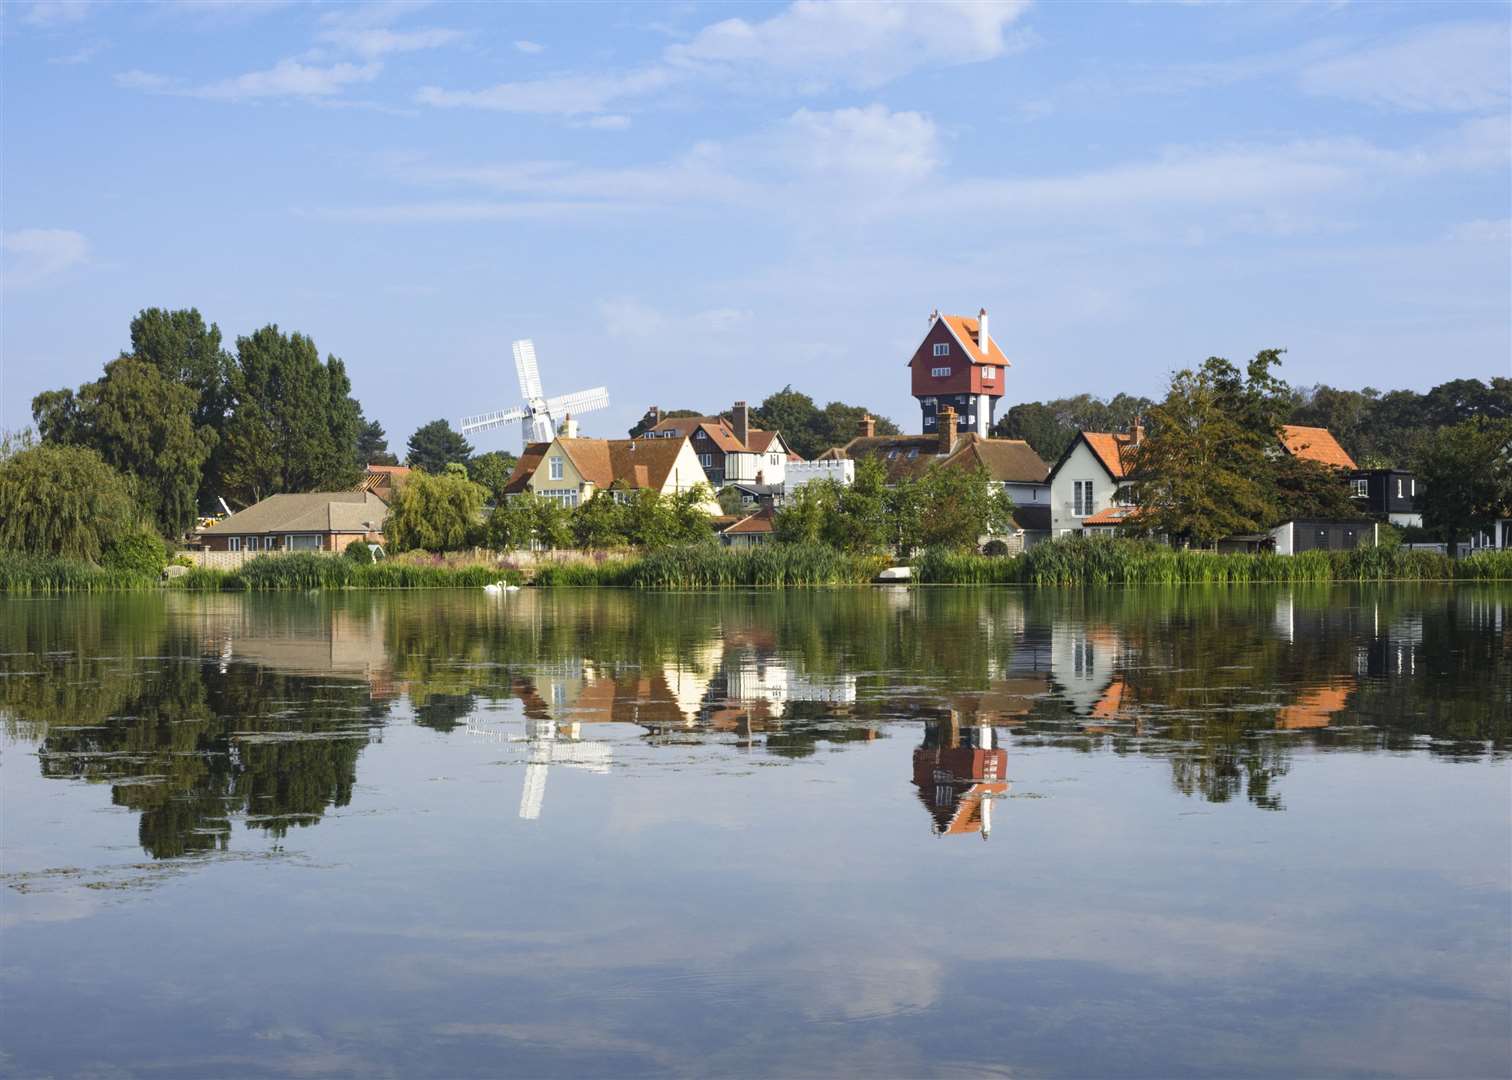 The House In The Clouds looks over Thorpeness Meare, which has been registered at Grade II (Historic England Archive/PA)